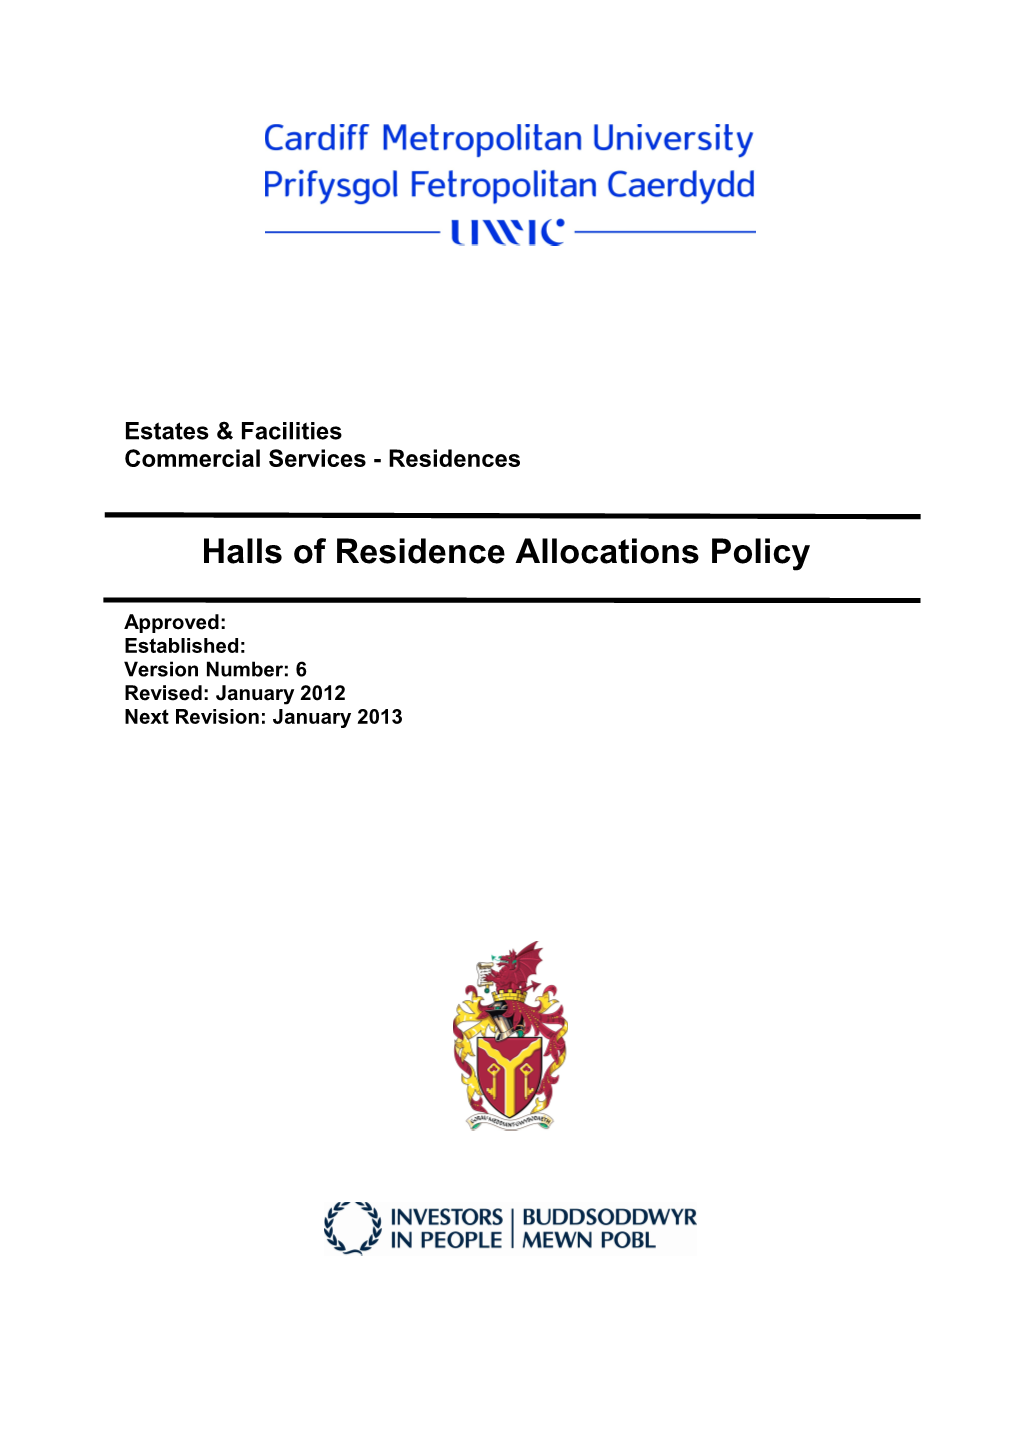 Halls of Residence Allocations Policy